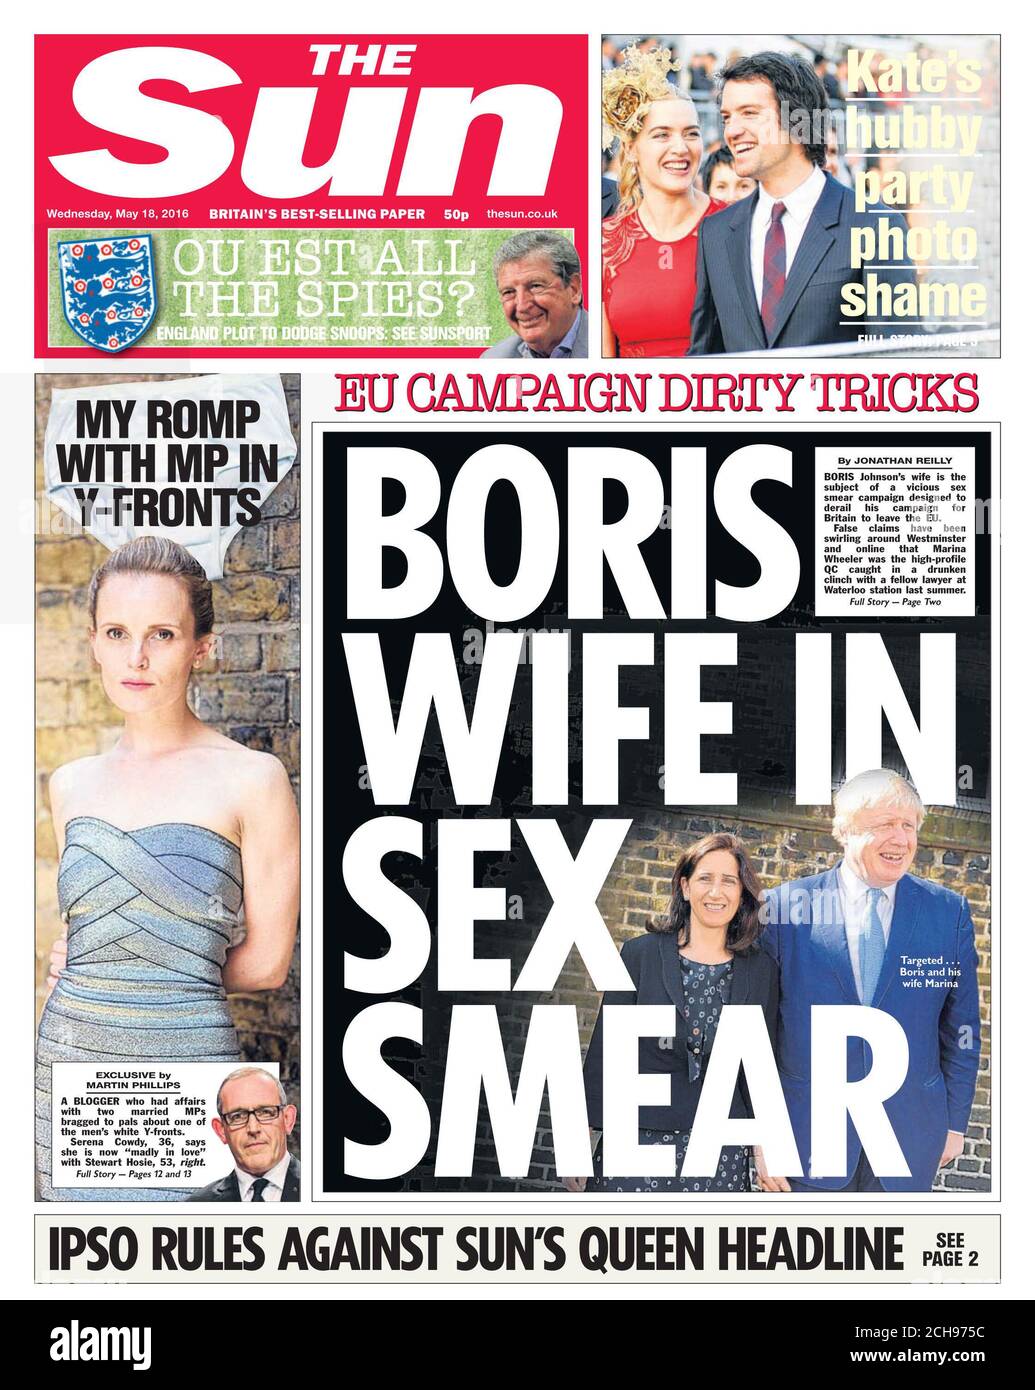 The front page of The Sun newspaper dated Wednesday May 18, 2016, after the Independent Press Standards Organisation (IPSO) ruled that paper's front page headline 'Queen backs Brexit' earlier this year was inaccurate, Stock Photo